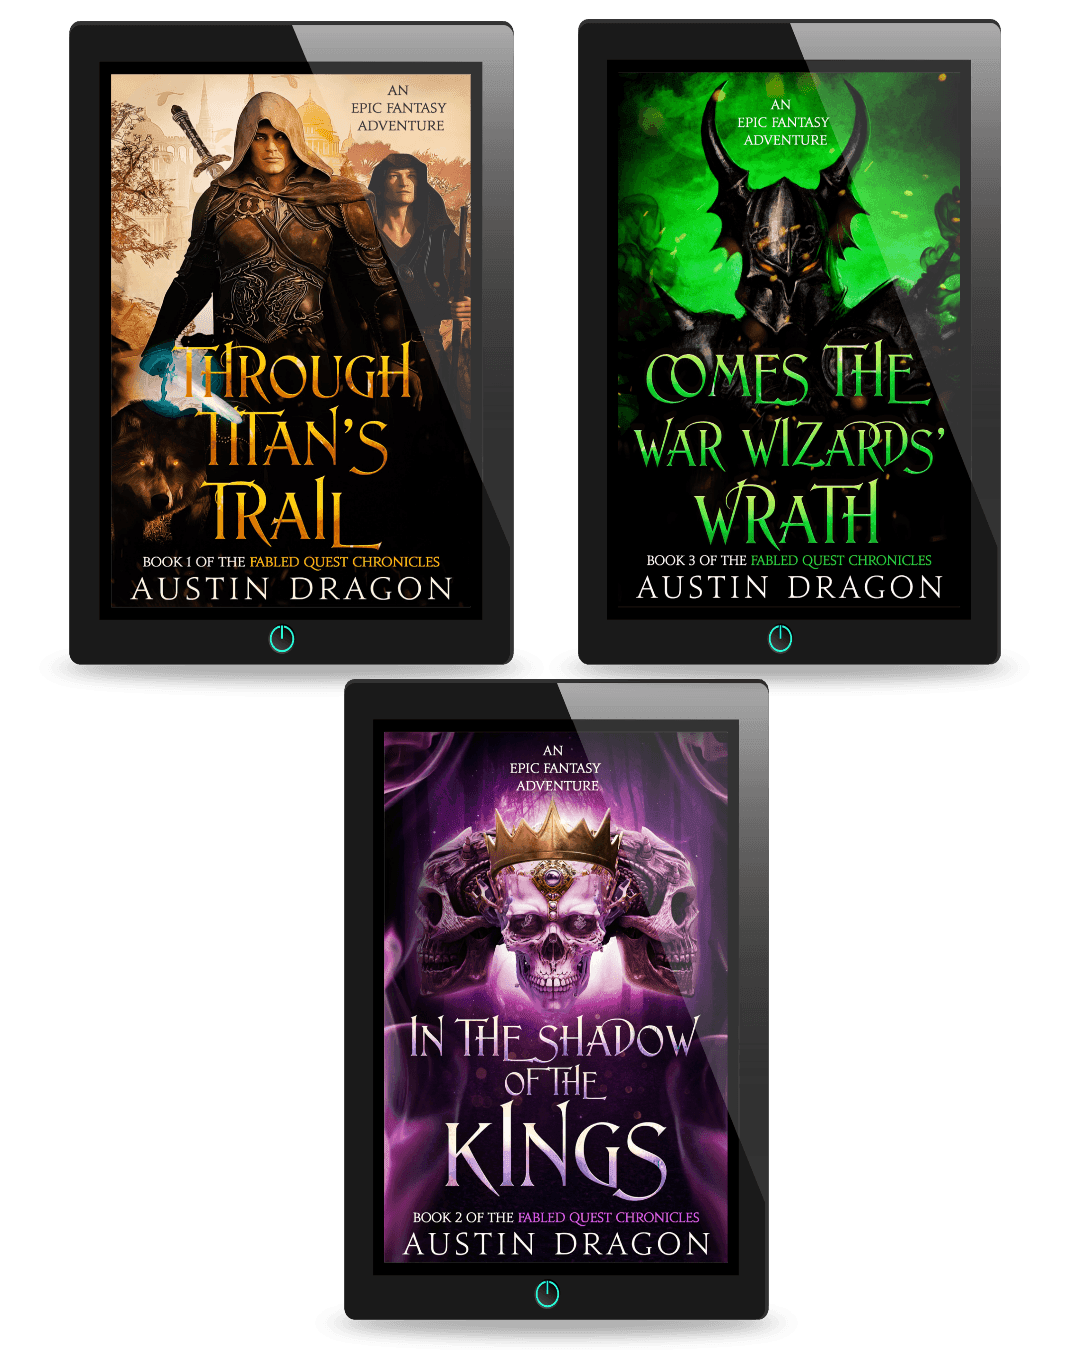 Fabled Quest Chronicles Box Set 1: Through Titan's Trail, In the Shadow of the Kings, Comes the War Wizards' Wrath (Ebooks)